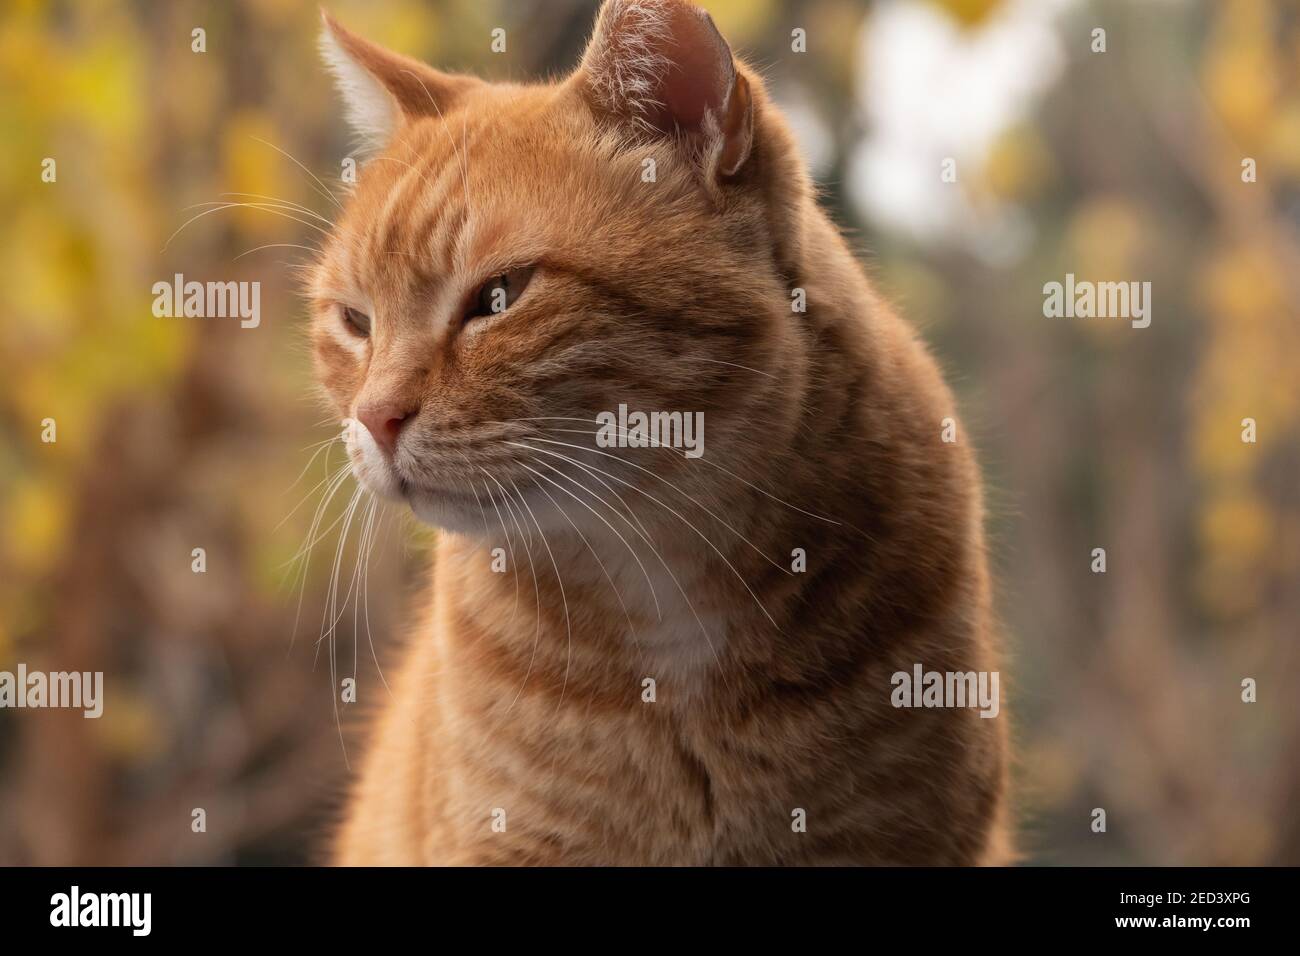 Street ginger red cat in the spring garden stands and looks away. Street portrait Stock Photo